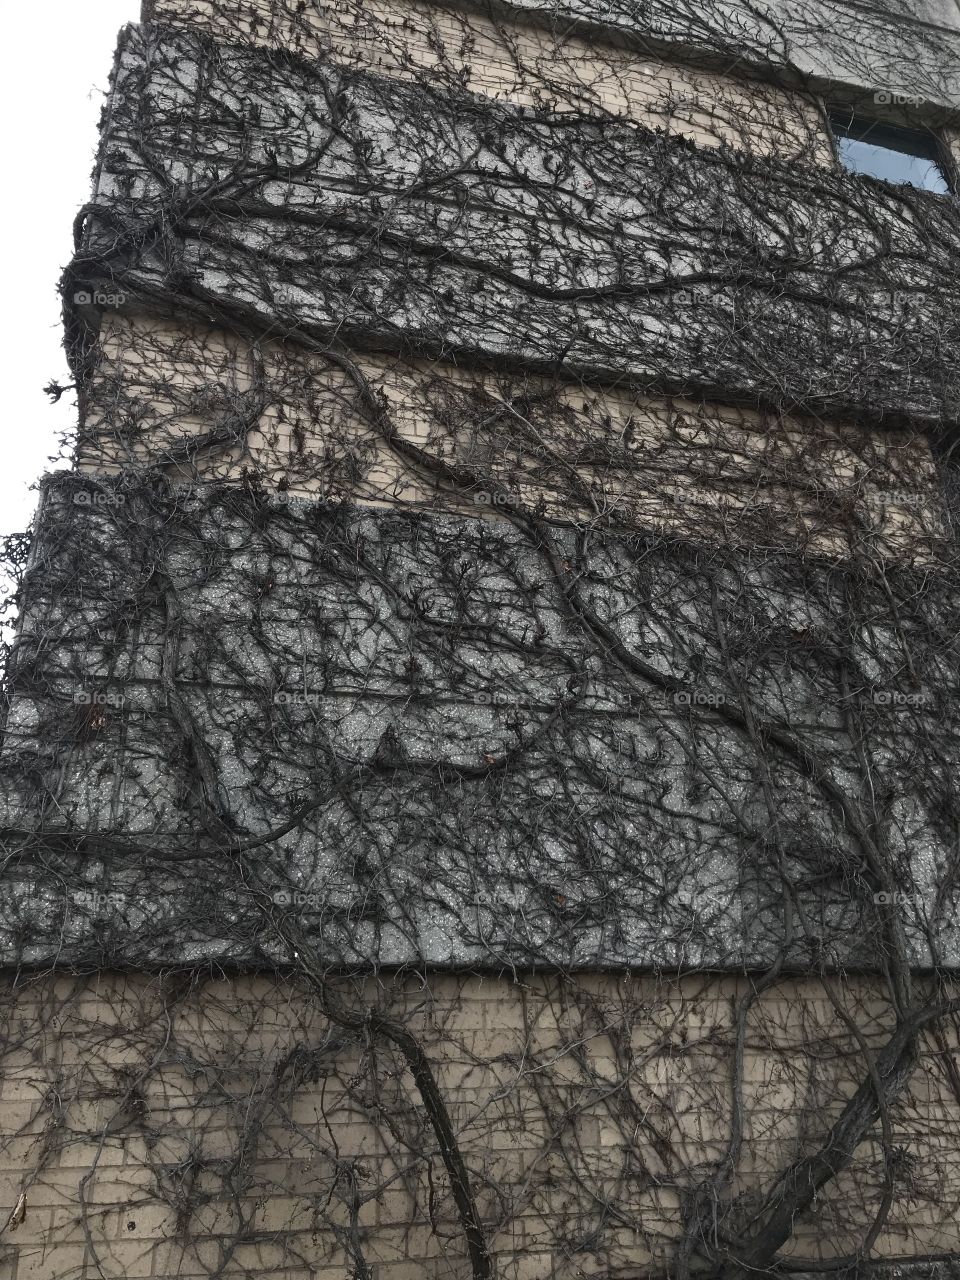 Vines cover the structure like human hair. 